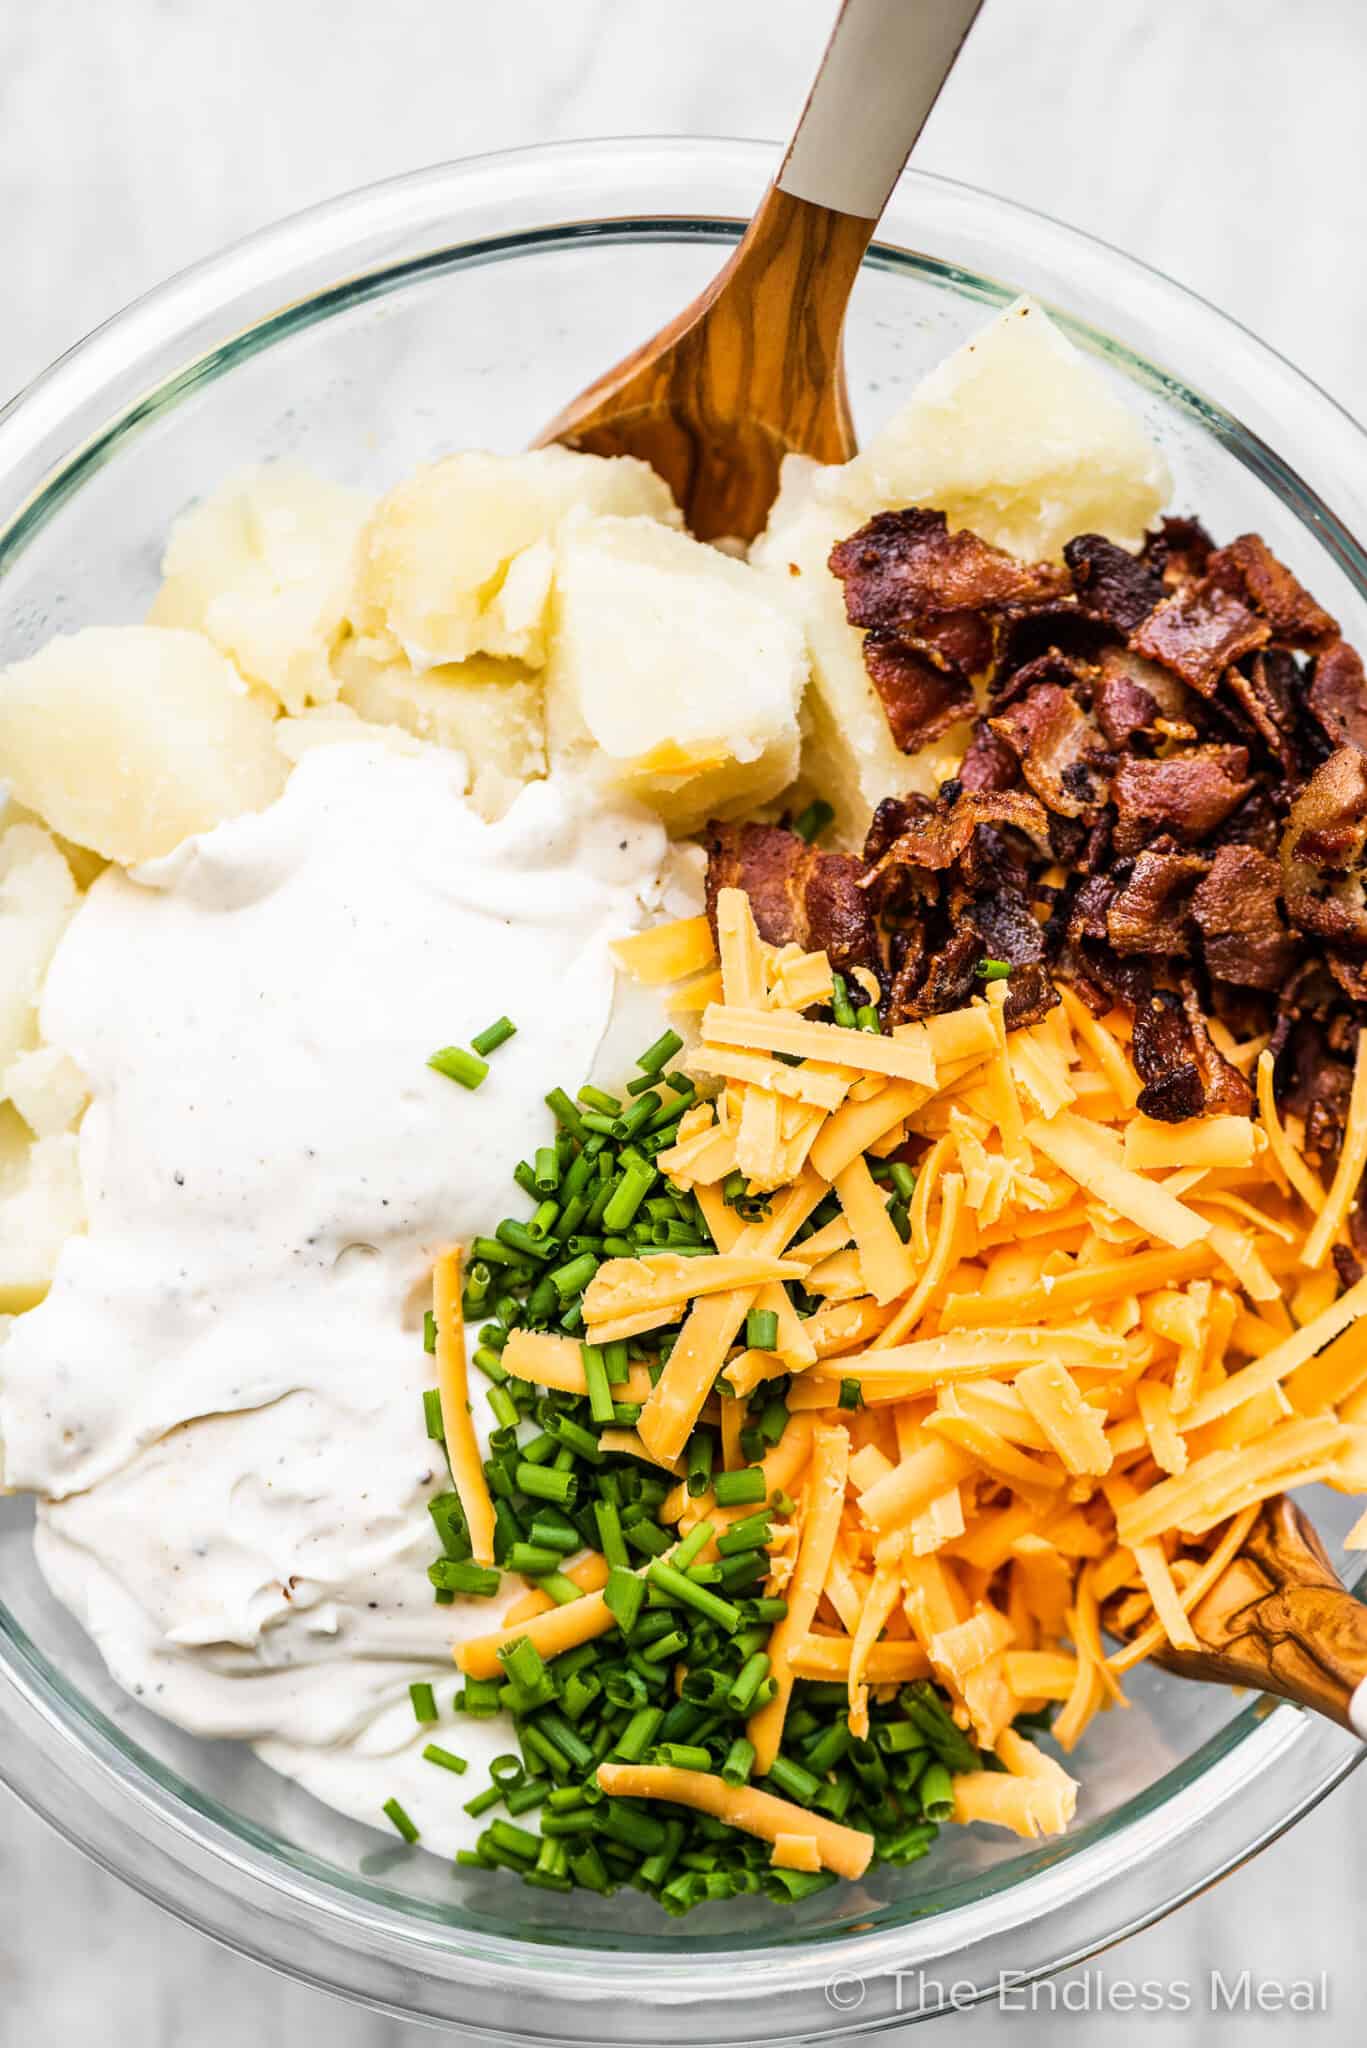 All the ingredients to make this baked potato salad recipe in a mixing bowl.